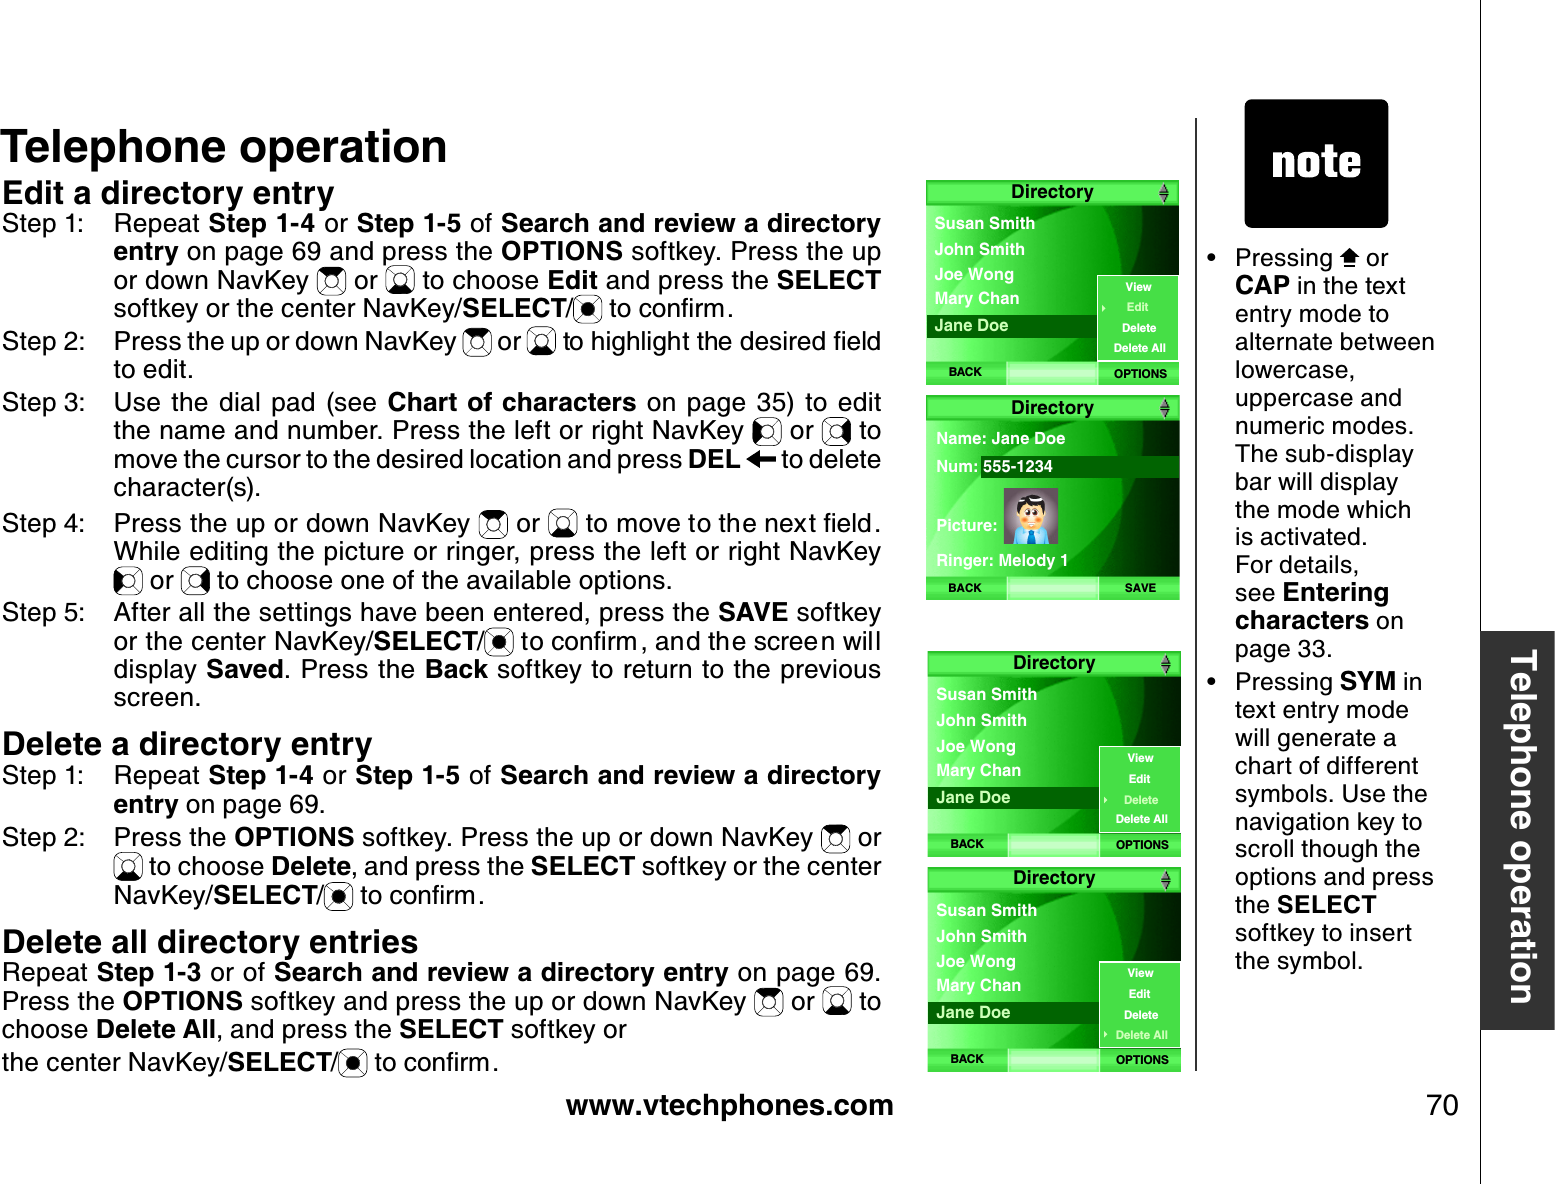 www.vtechphones.com 70Telephone operationTelephone operationEdit a directory entryStep 1: Repeat Step 1-4 or Step 1-5 of Search and review a directory entry on page 69 and press the OPTIONS softkey. Press the up or down NavKey   or   to choose Edit and press the SELECTsoftkey or the center NavKey/SELECT/VQEQPſTOStep 2: Press the up or down NavKey   or  VQJKIJNKIJVVJGFGUKTGFſGNFto edit.Step 3: Use  the  dial  pad  (see  Chart of characters  on  page  35) to  edit the name and number. Press the left or right NavKey   or   to move the cursor to the desired location and press DEL  to delete character(s).Step 4: Press the up or down NavKey   or   to movGVQVJGPGZVſGNFWhile editing the picture or ringer, press the left or right NavKey  or   to choose one of the available options. Step 5: After all the settings have been entered, press the SAVE softkey or the center NavKey/SELECT/VQEQPſTO CPFVJGUETGGPYKNNdisplay Saved. Press the Back softkey to return to the previous screen.Delete a directory entryStep 1: Repeat Step 1-4 or Step 1-5 of Search and review a directory entry on page 69.  Step 2: Press the OPTIONS softkey. Press the up or down NavKey   or  to choose Delete, and press the SELECT softkey or the center NavKey/SELECT/VQEQPſTODelete all directory entriesRepeat Step 1-3 or of Search and review a directory entry on page 69. Press the OPTIONS softkey and press the up or down NavKey   or   to choose Delete All, and press the SELECT softkey or the center NavKey/SELECT/VQEQPſTOPressing   or CAP in the text entry mode to alternate between lowercase, uppercase and numeric modes. The sub-display bar will display the mode which is activated. For details, see Entering characters on page 33.Pressing SYM in text entry mode will generate a chart of different symbols. Use the navigation key to scroll though the options and press the SELECTsoftkey to insert the symbol.••DirectoryBACK OPTIONSJoe Wong Susan SmithMary Chan John SmithJane DoeViewEditDeleteDelete AllBACK SAVEName: Jane DoeNum: 555-1234 Picture:Ringer: Melody 1 DirectoryDirectoryBACK OPTIONSJoe Wong Susan SmithMary Chan John SmithJane DoeViewEditDeleteDelete AllDirectoryBACK OPTIONSJoe Wong Susan SmithMary Chan John SmithJane DoeViewEditDeleteDelete All